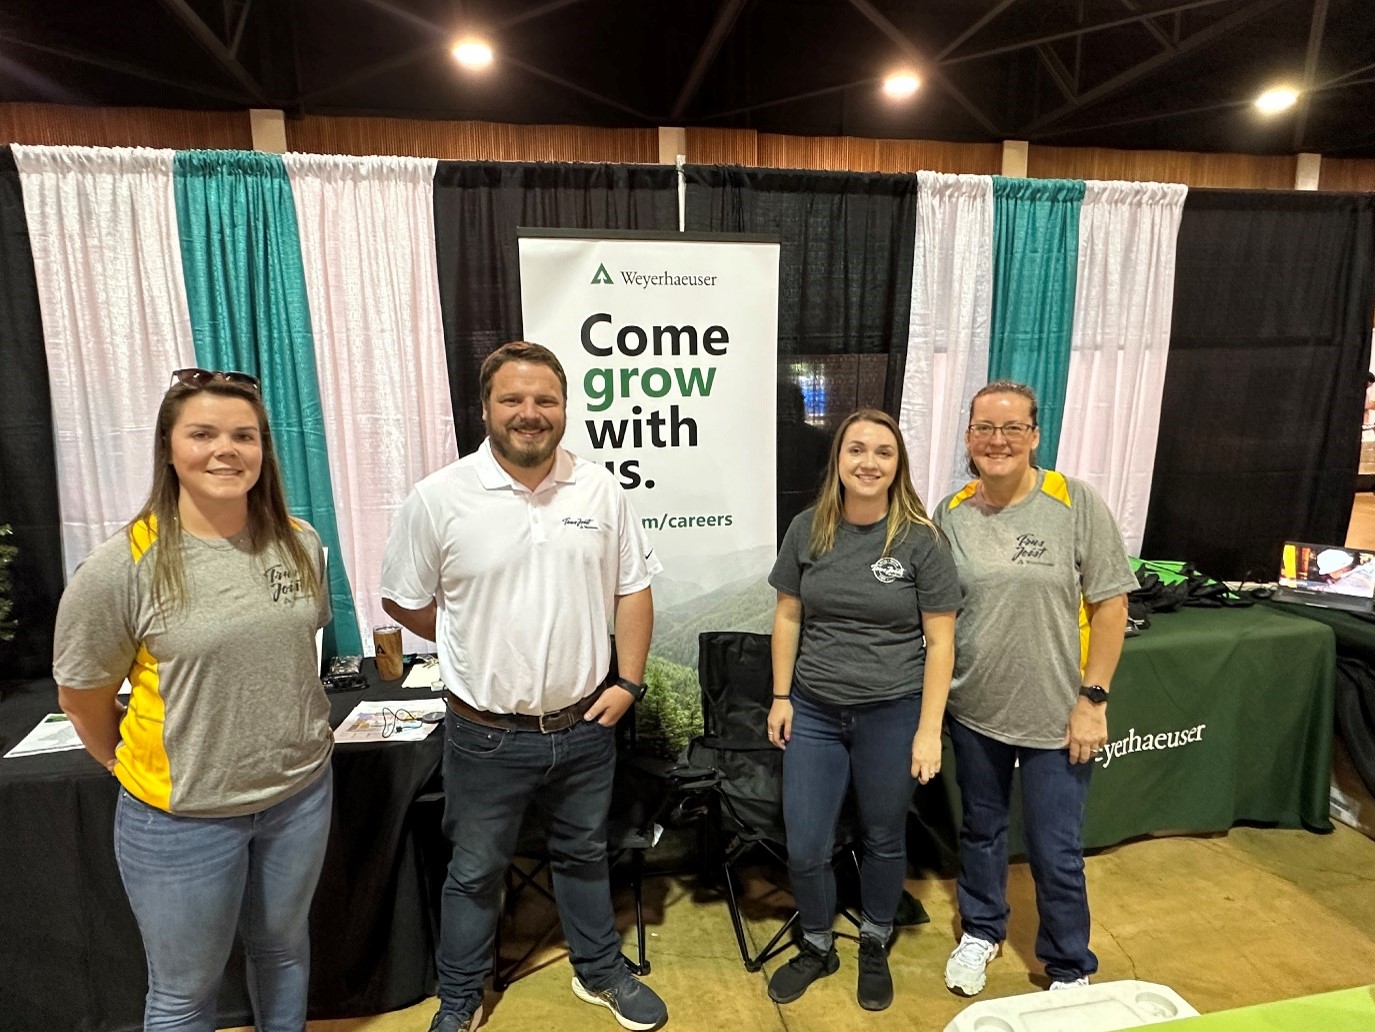 Tom and three other people stand in a row in front of a curtained booth at a recruiting fair with a banner reading "Come Grow With Us" in the background.